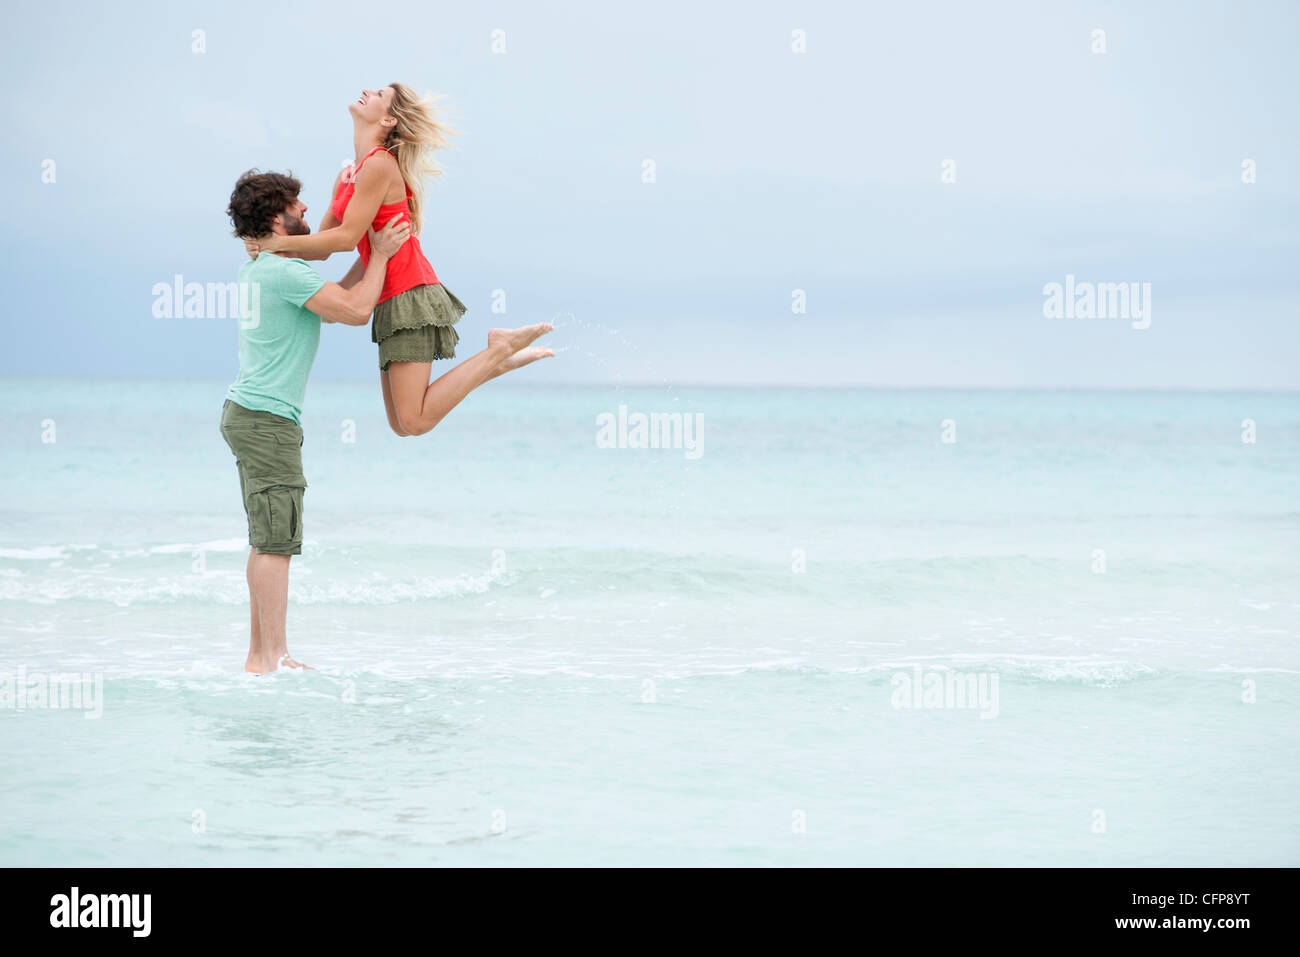 Couple at the beach, man lifting woman in air Stock Photo